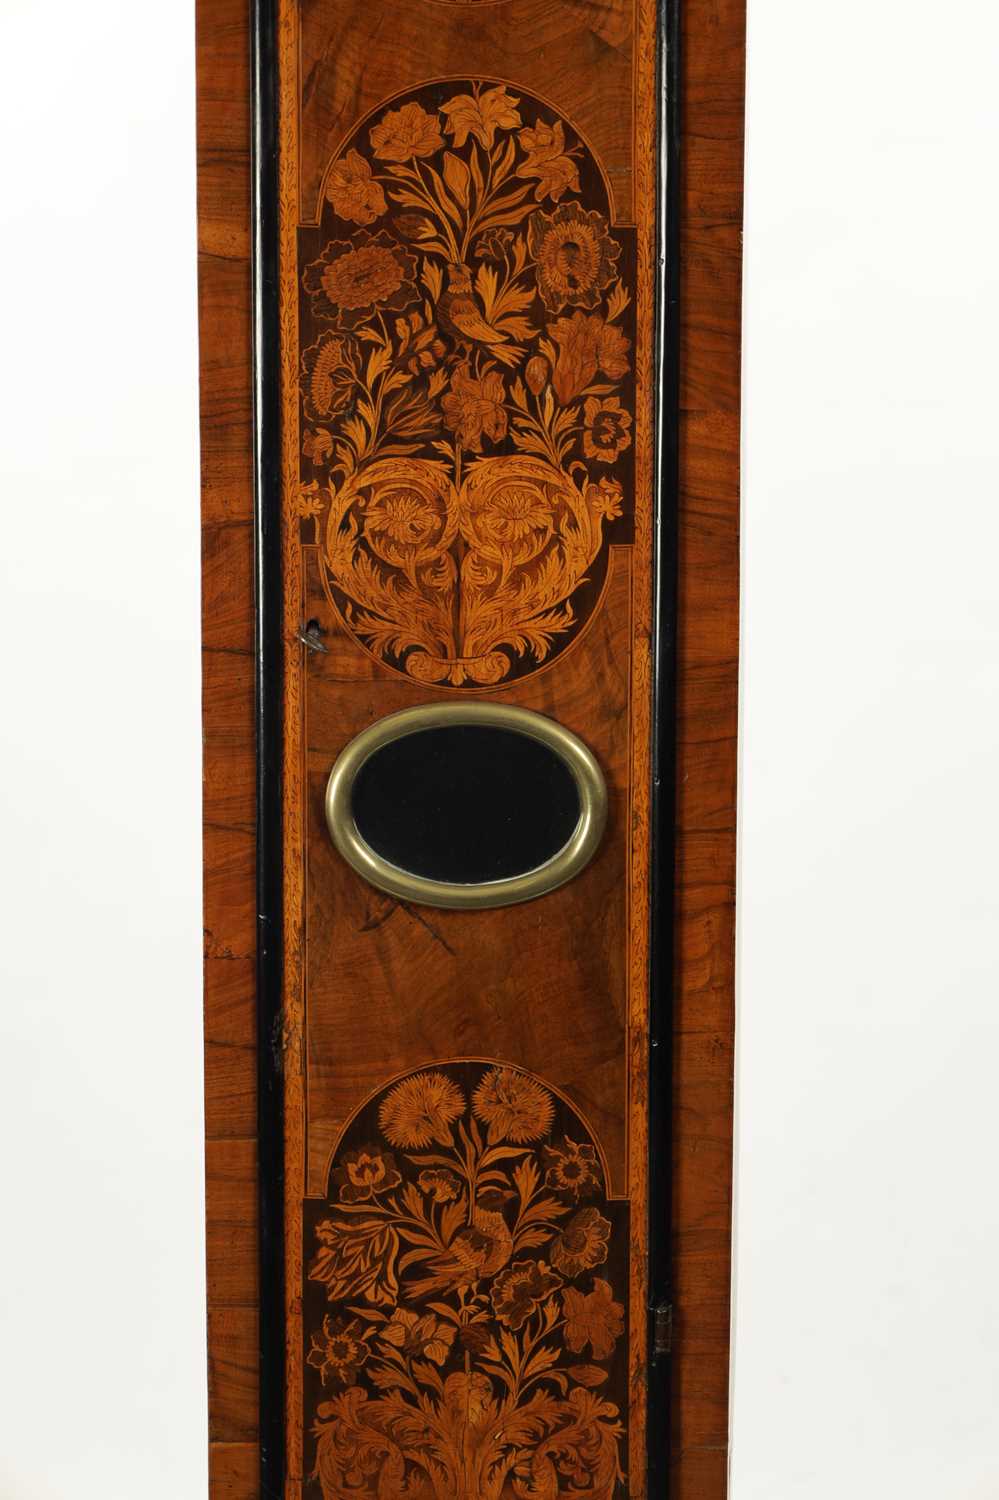 JOSEPH WINDMILLS, LONDON. A FINE EARLY 18TH CENTURY MARQUETRY EIGHT-DAY LONGCASE CLOCK - Image 2 of 5